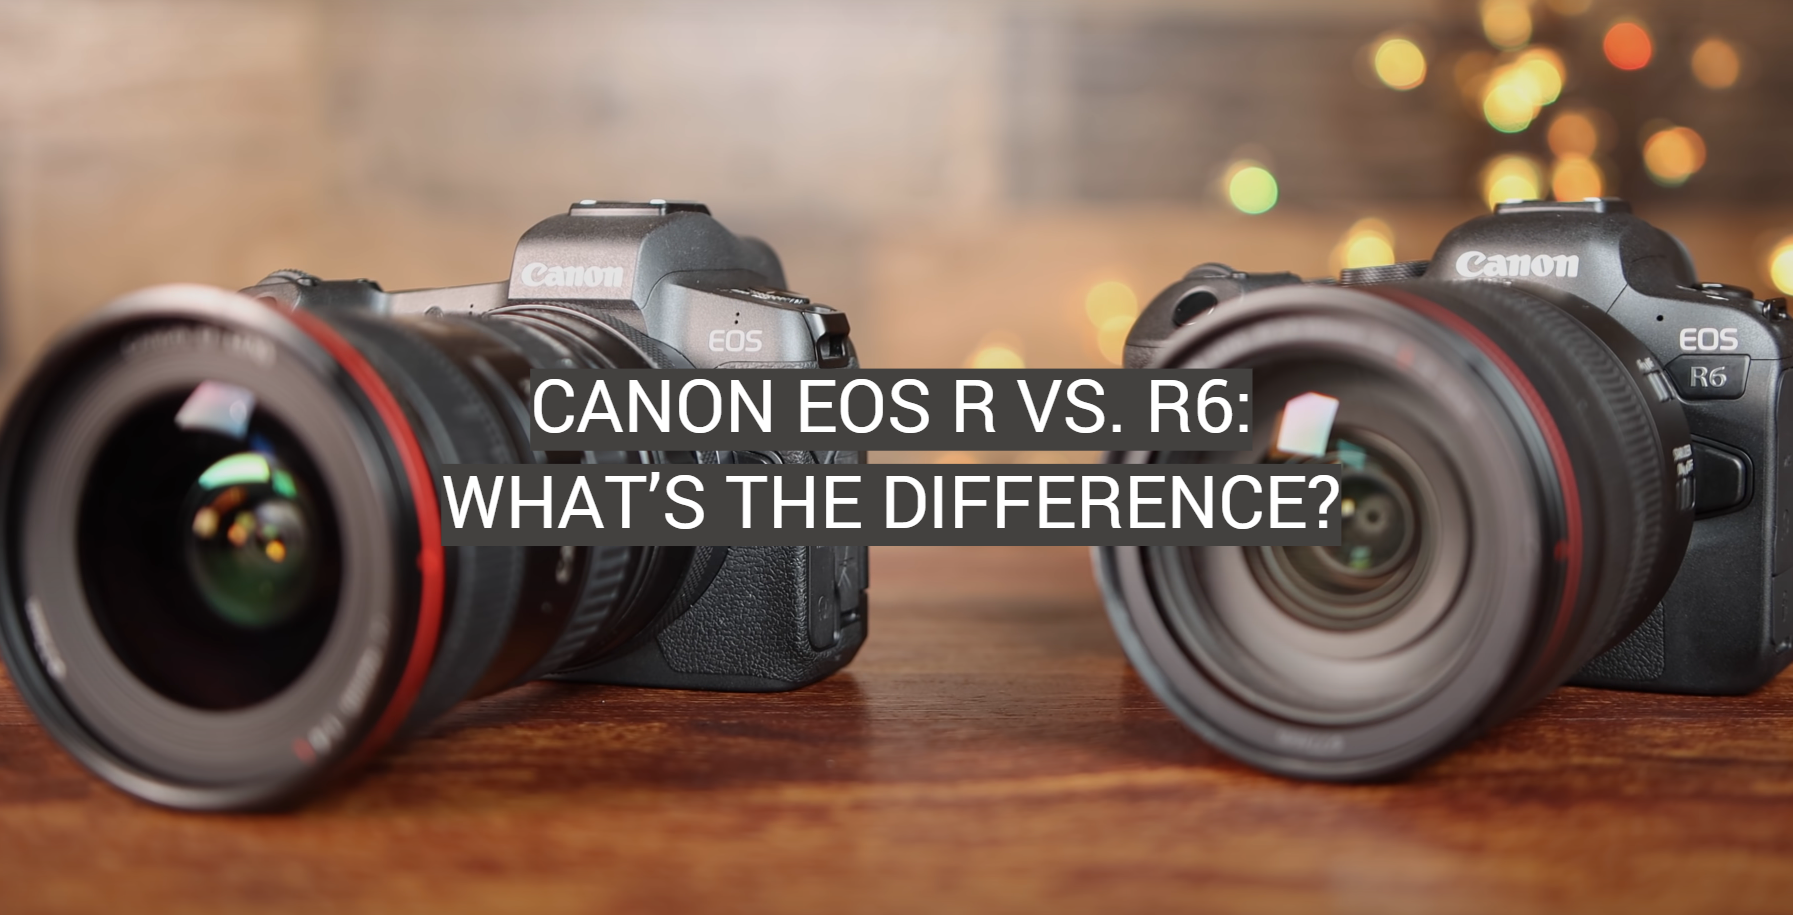 Canon EOS R vs. R6: What’s the Difference?